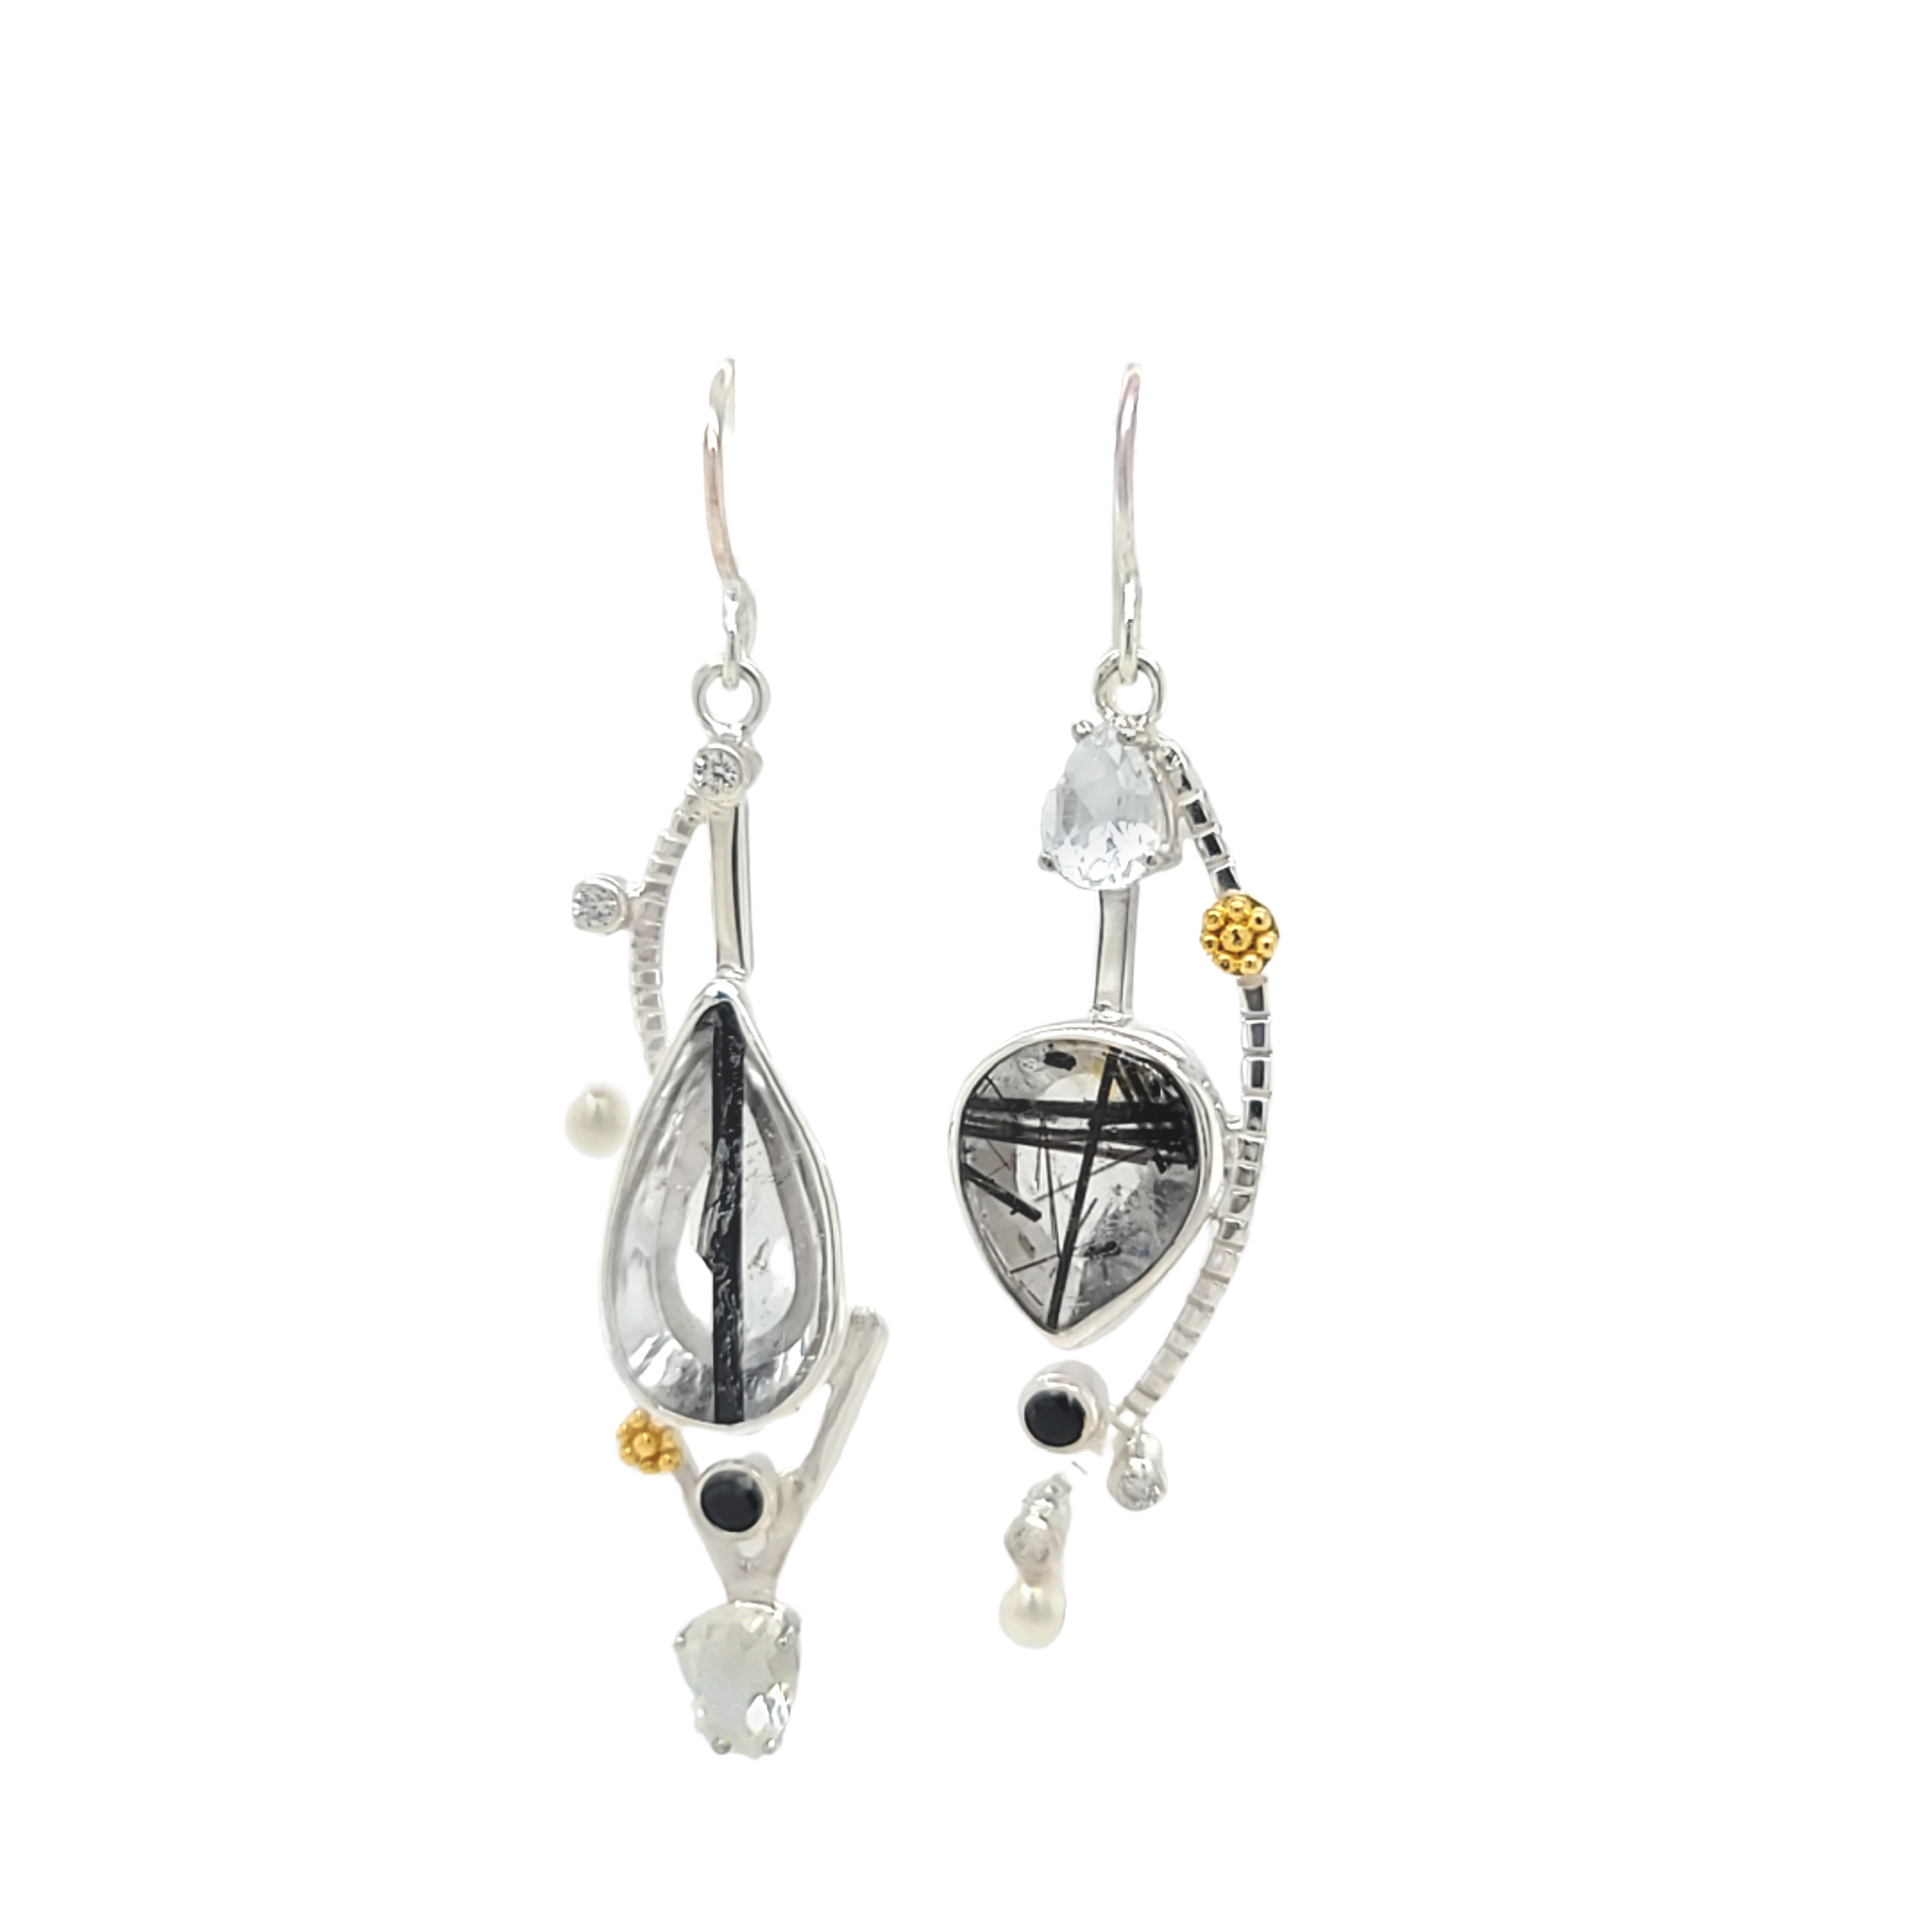 Tourmalinated Quartz and 22k Gold Earrings